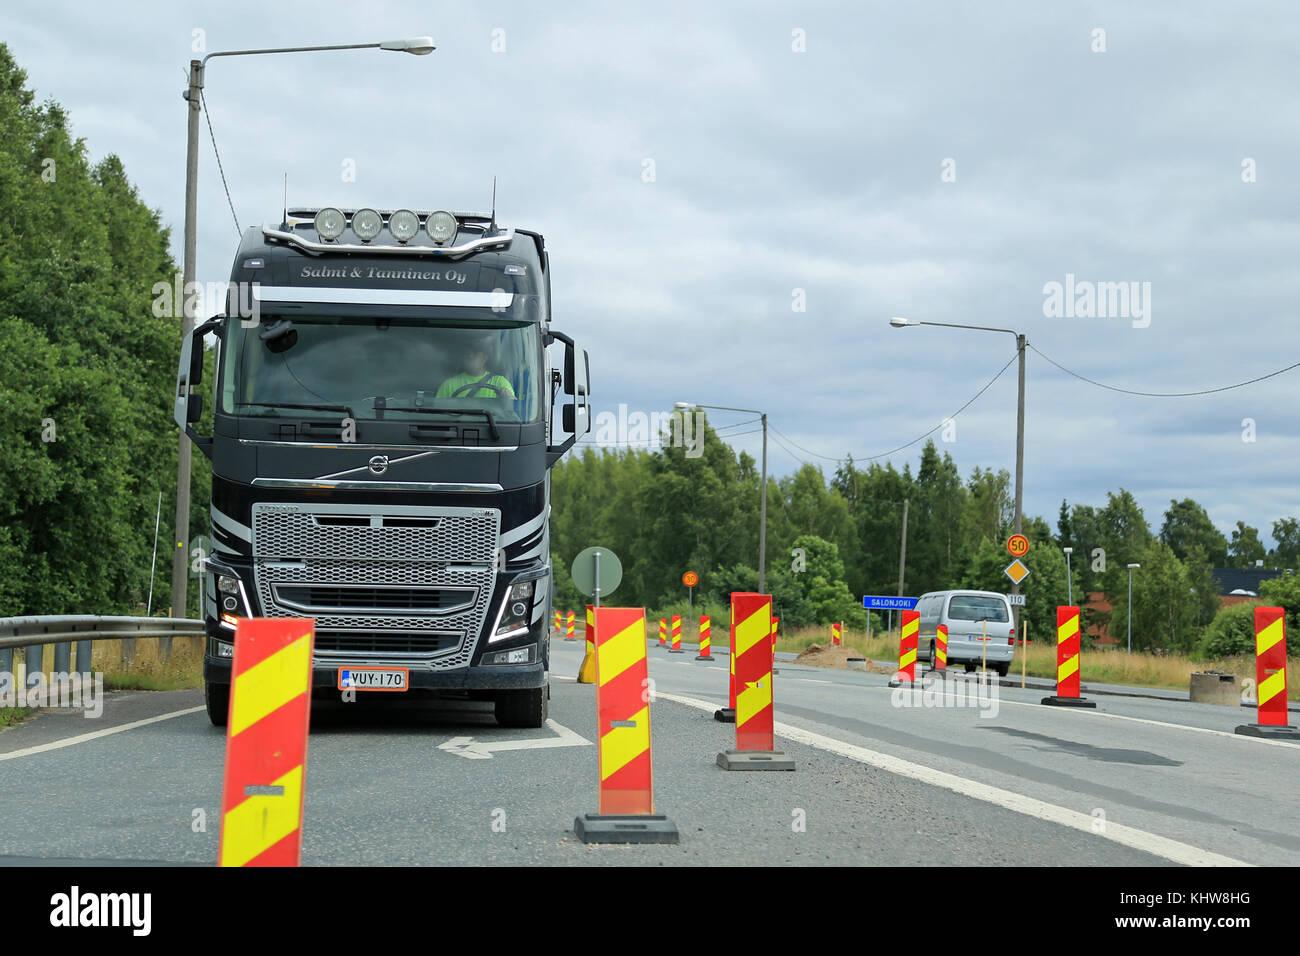 SALO, FINLAND - JULY 31, 2015: Volvo FH truck driving through road works in Salo, Finland. Road works slow down traffic particularly in South of Finla Stock Photo